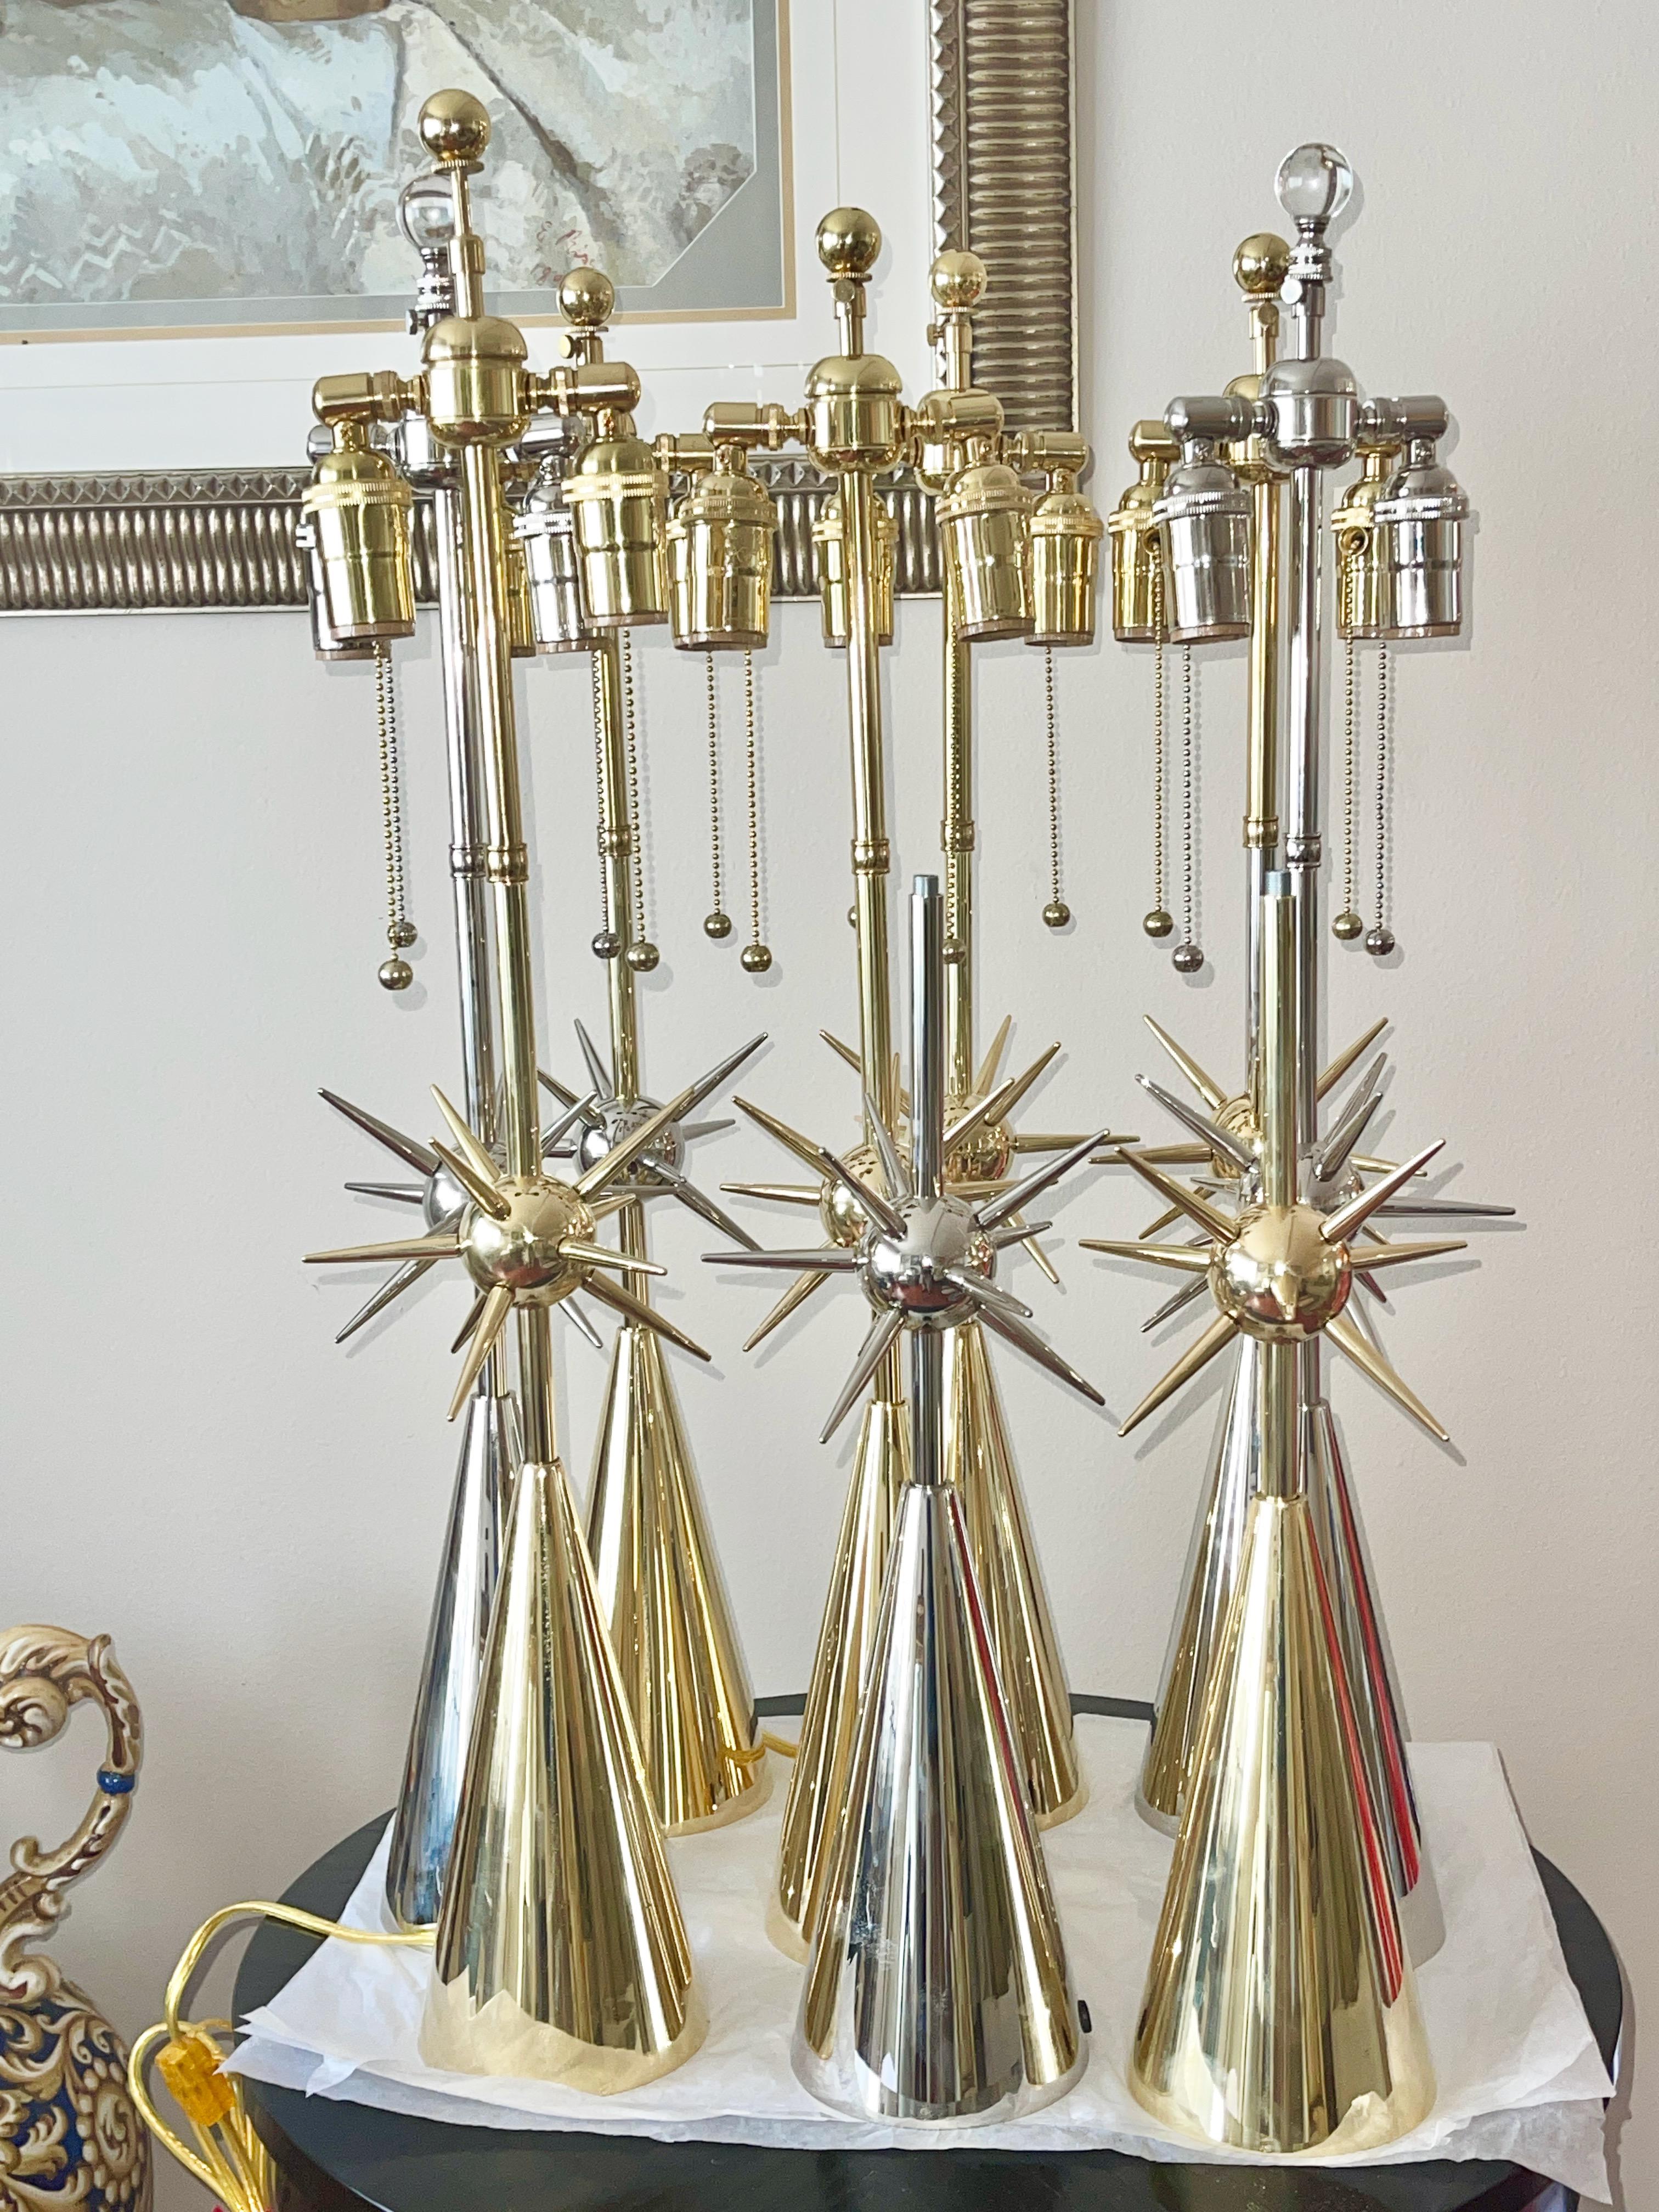 CURRENTLY WE HAVE IN STOCK FIVE BRASS AND FOUR NICKEL LAMPS AVAILABLE FOR IMMEDIATE DELIVERY

One of my favorite lamps. I love the atomic mace-like sputnik starburst ball of spikes seeming to hover above the crisp round brass conical base.
It is